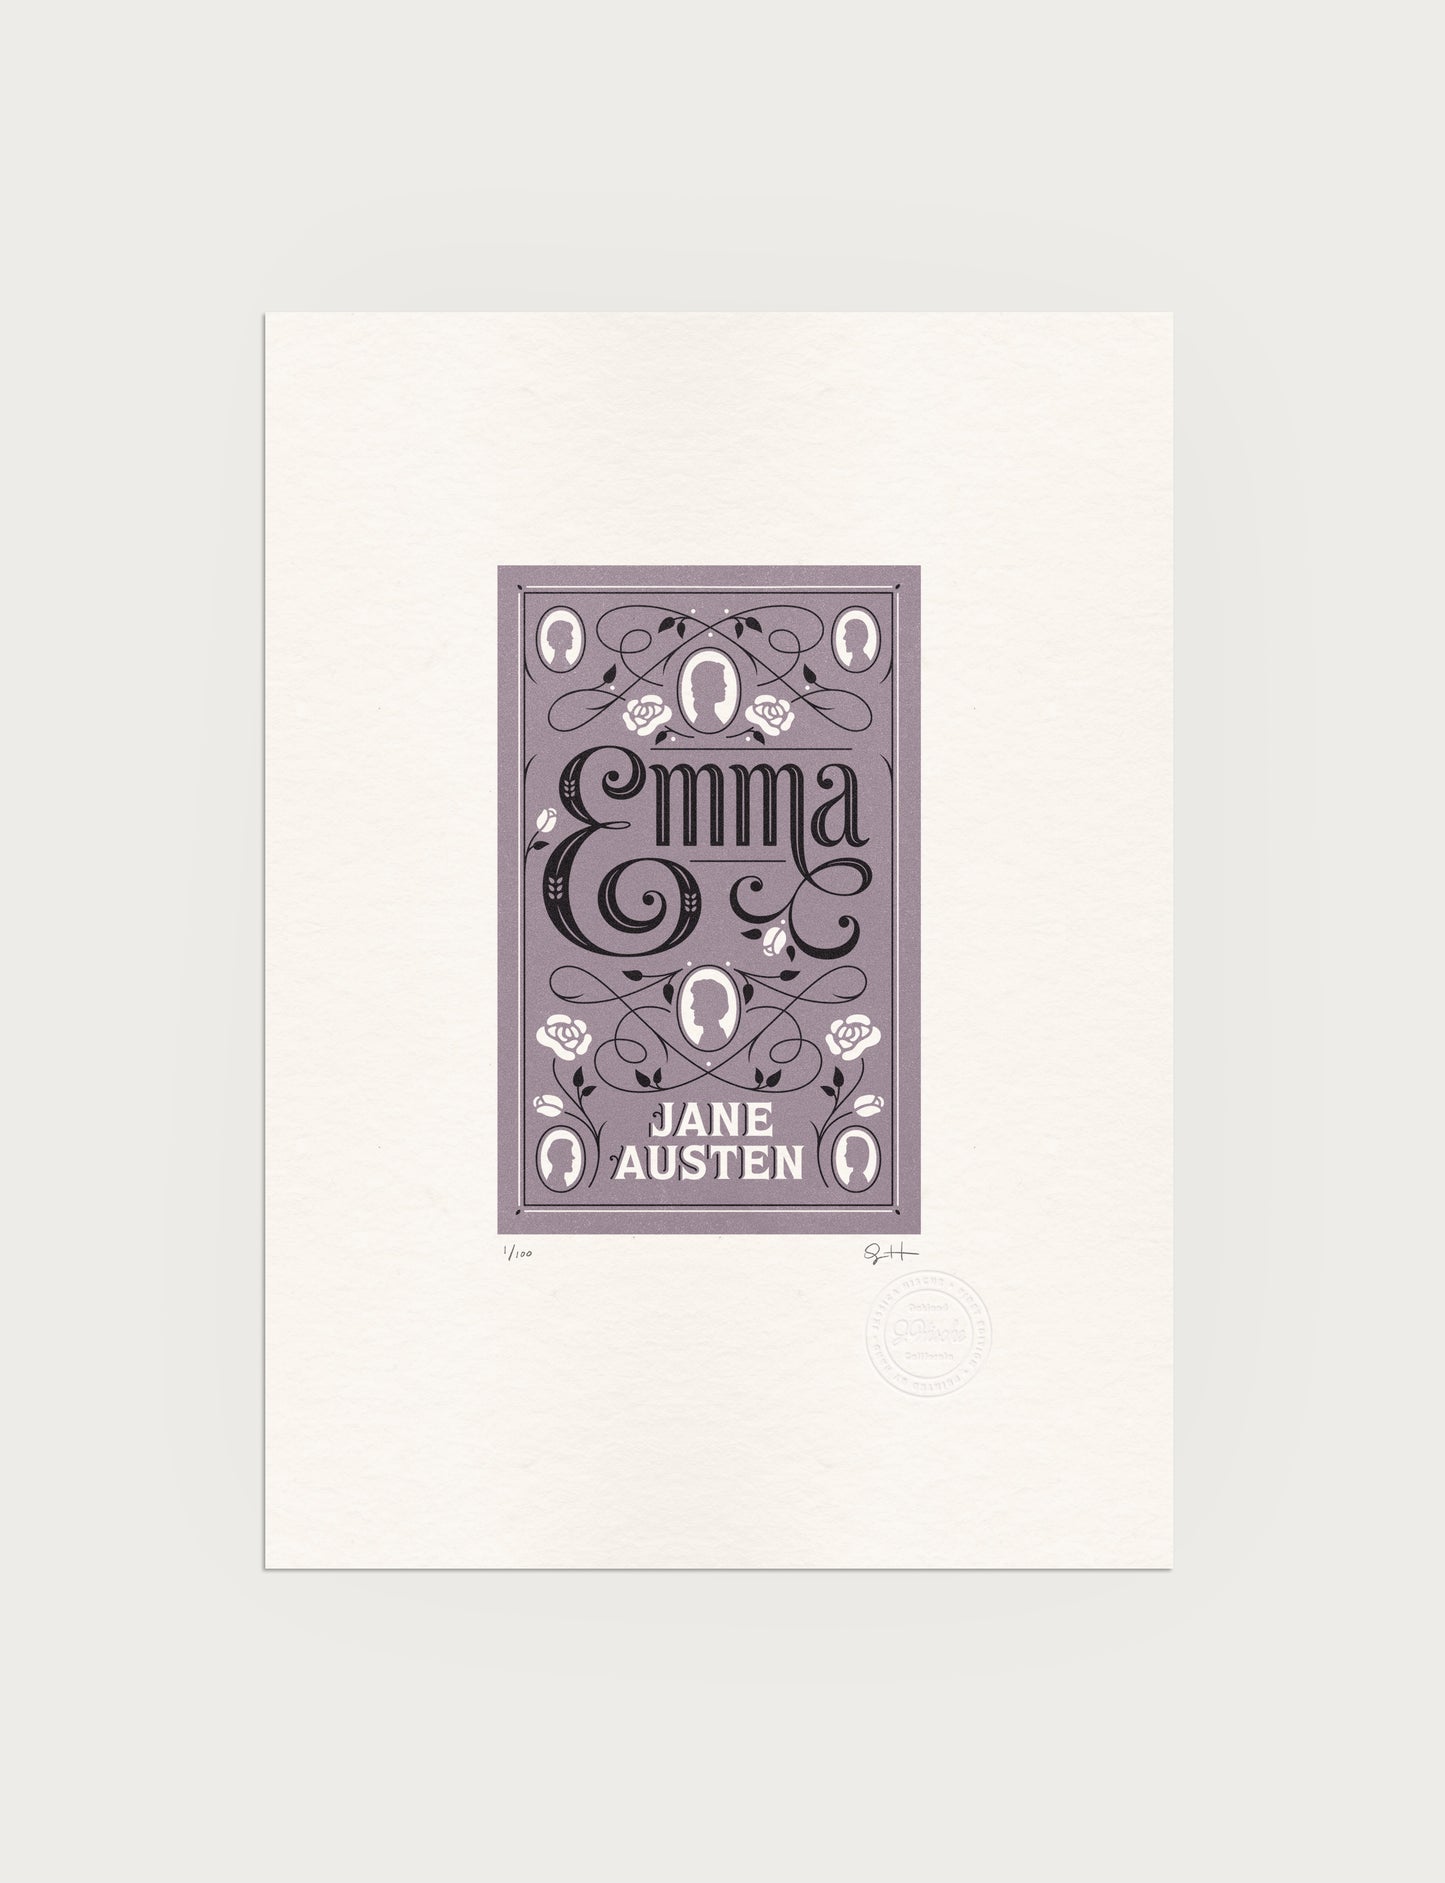 2-color letterpress print in violet and black. Printed artwork is an illustrated book cover of Emma including custom hand lettering.